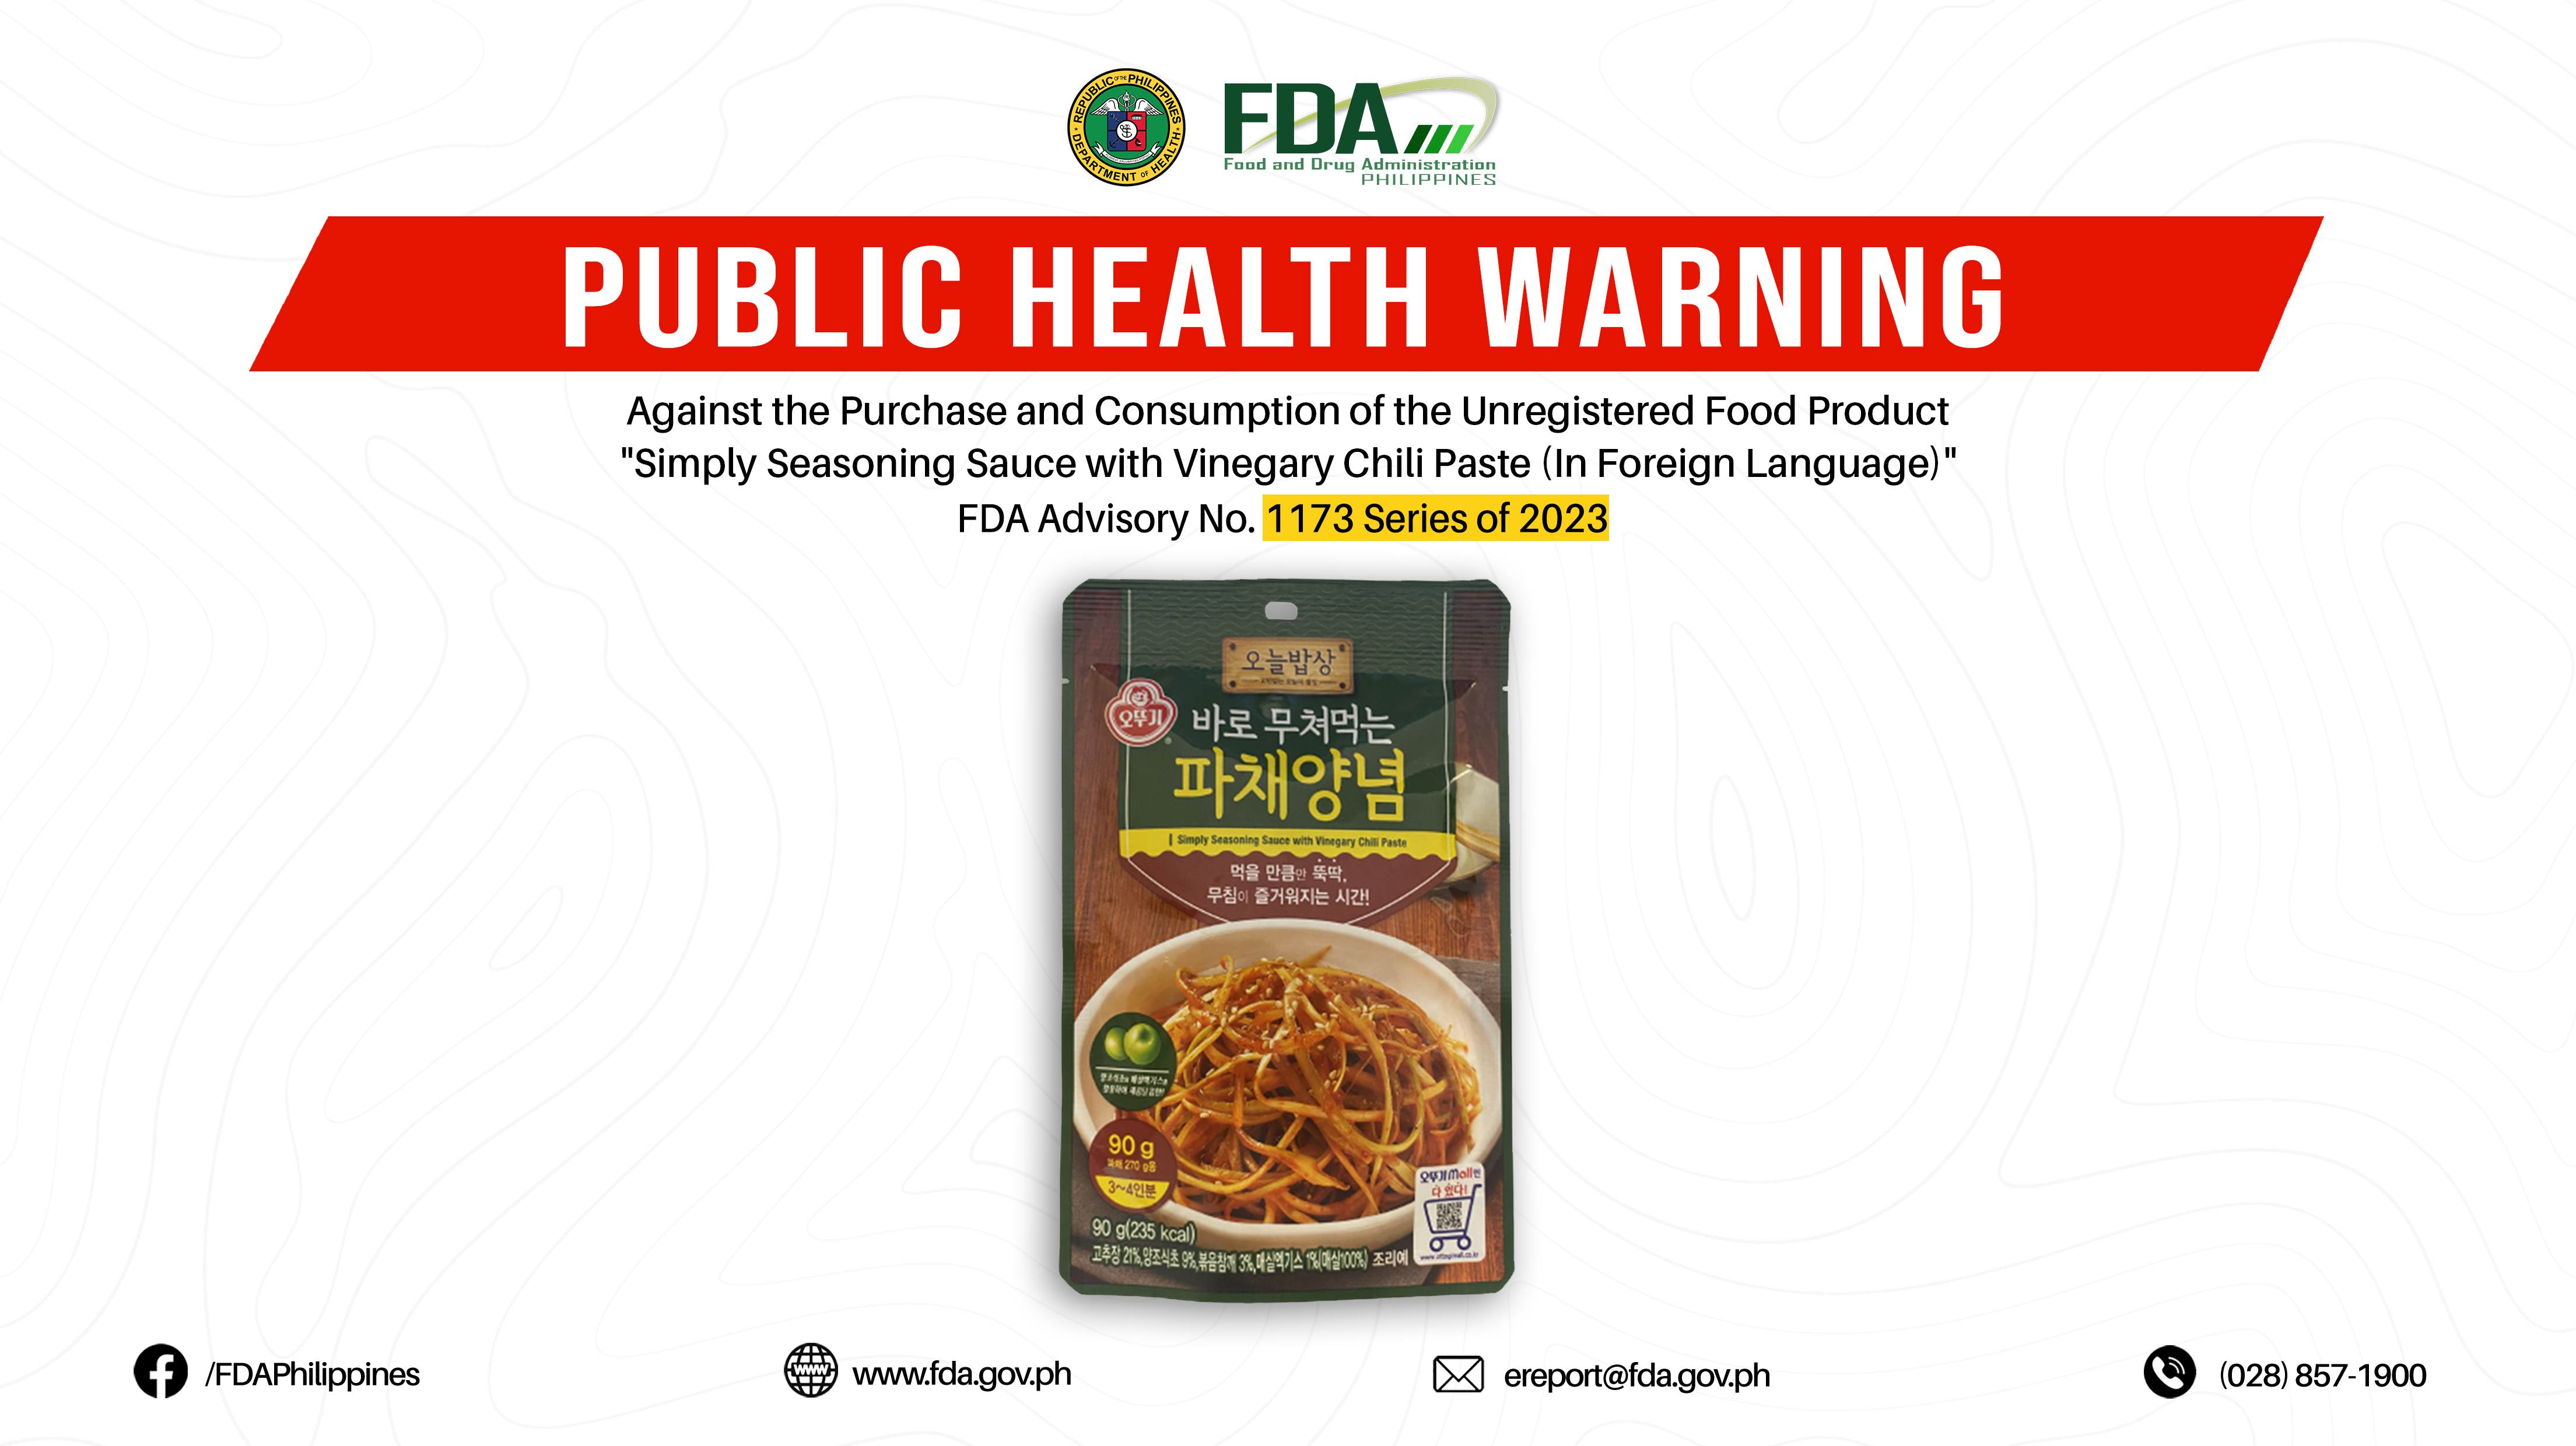 FDA Advisory No.2023-1173 || Public Health Warning Against the Purchase and Consumption of the Unregistered Food Product “Simply Seasoning Sauce with Vinegary Chili Paste (In Foreign Language)”